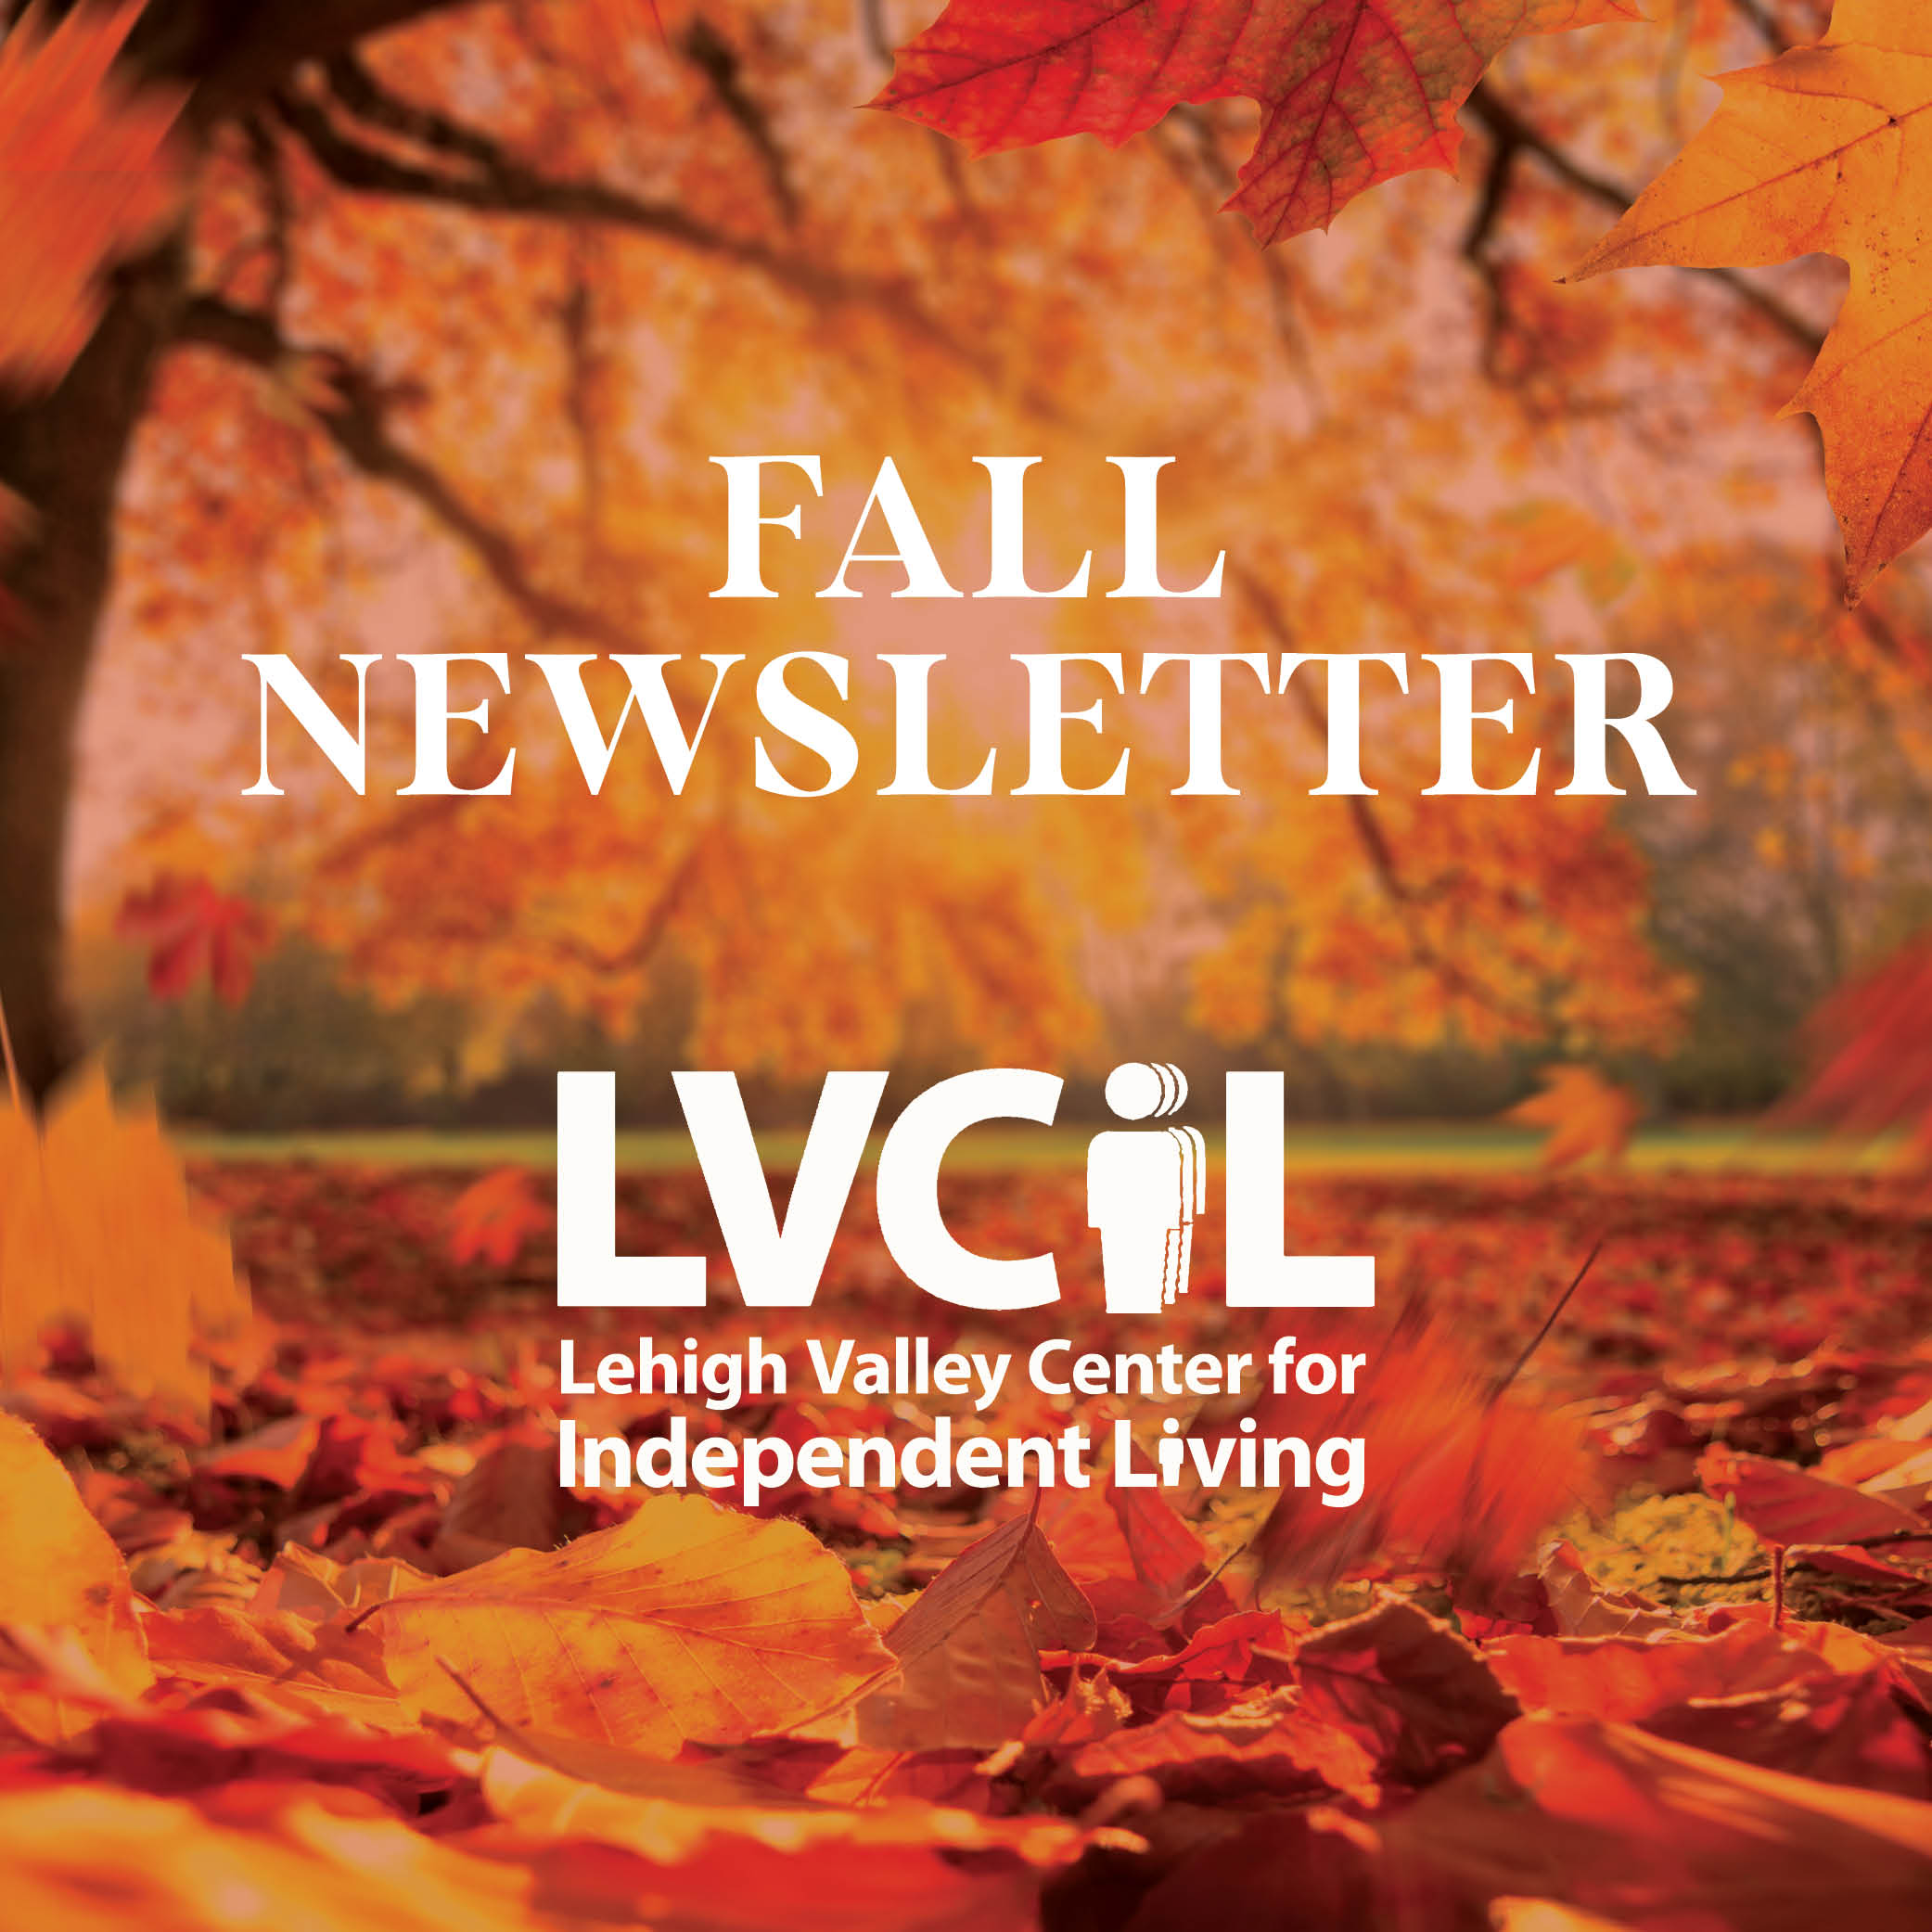 Check out our Fall 2022 Newsletter